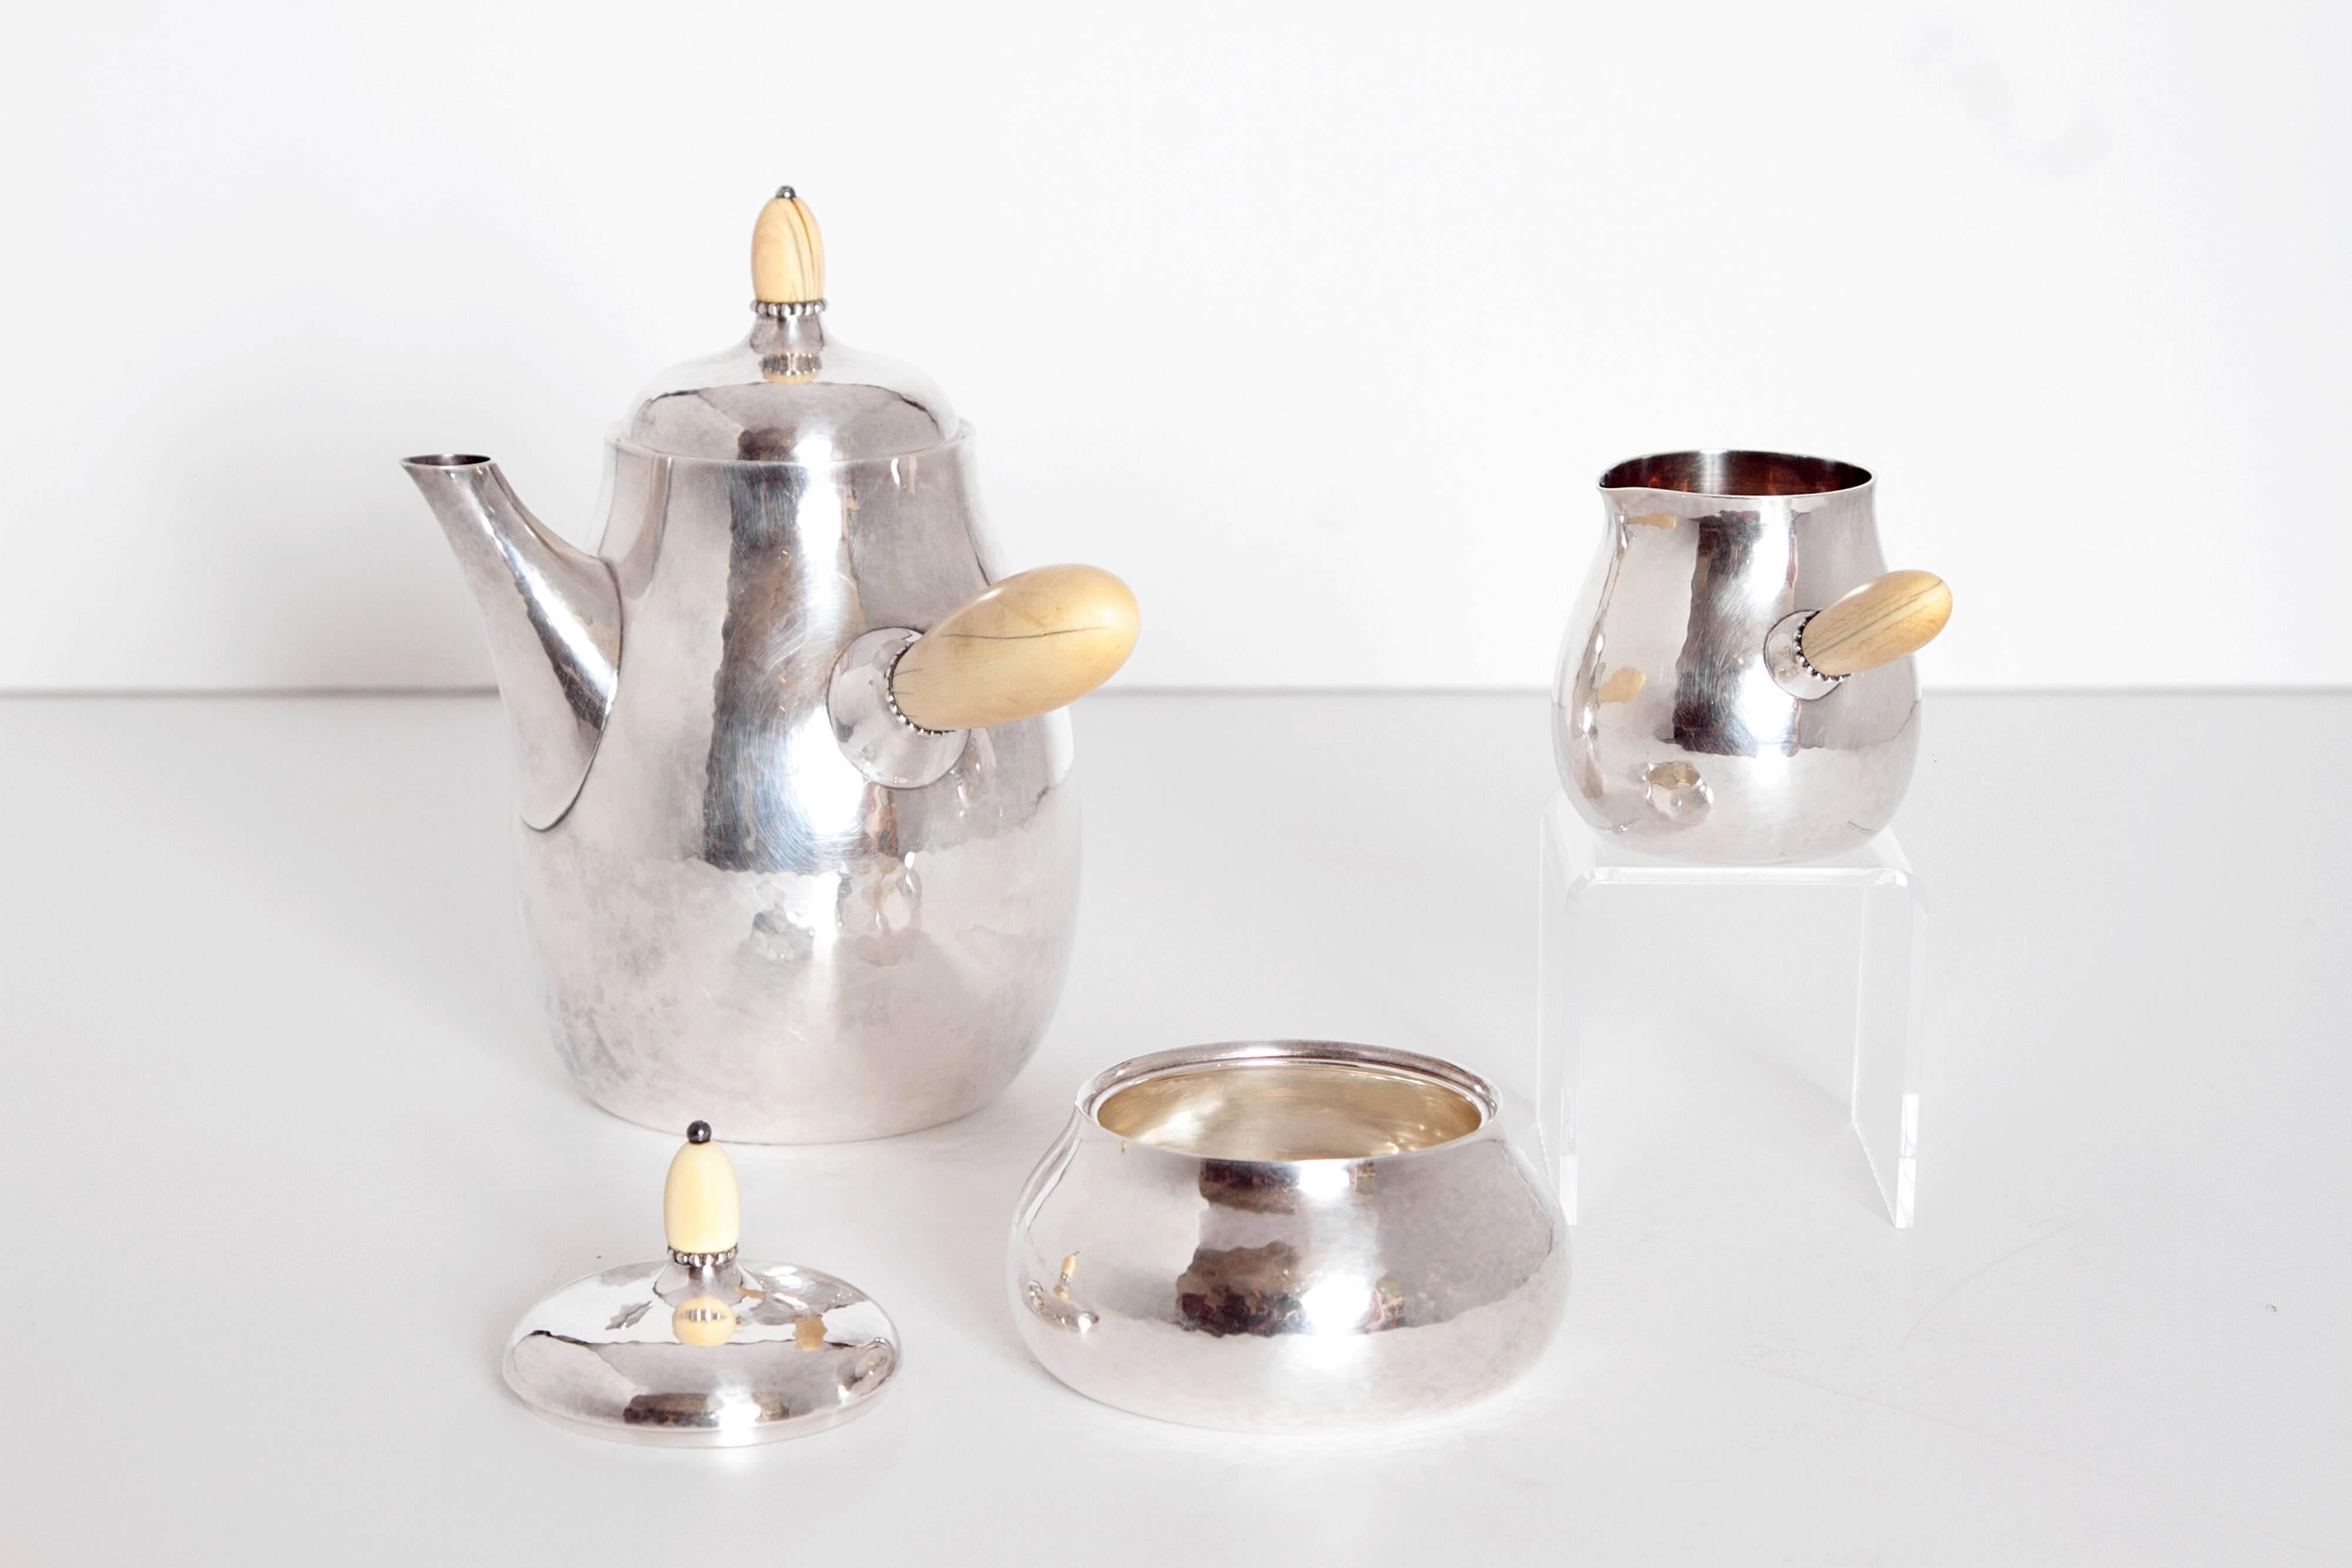 A Georg Jensen coffee set of silver with pot, sugar and cream jug. Bone handles and finials on lids. Stamped A. E. F. Sterling, Denmark

Measures: Coffee pot: 7 inches high x 7.50 inches wide x 4.25 inches deep
Creamer: 2.50 inches high x 4